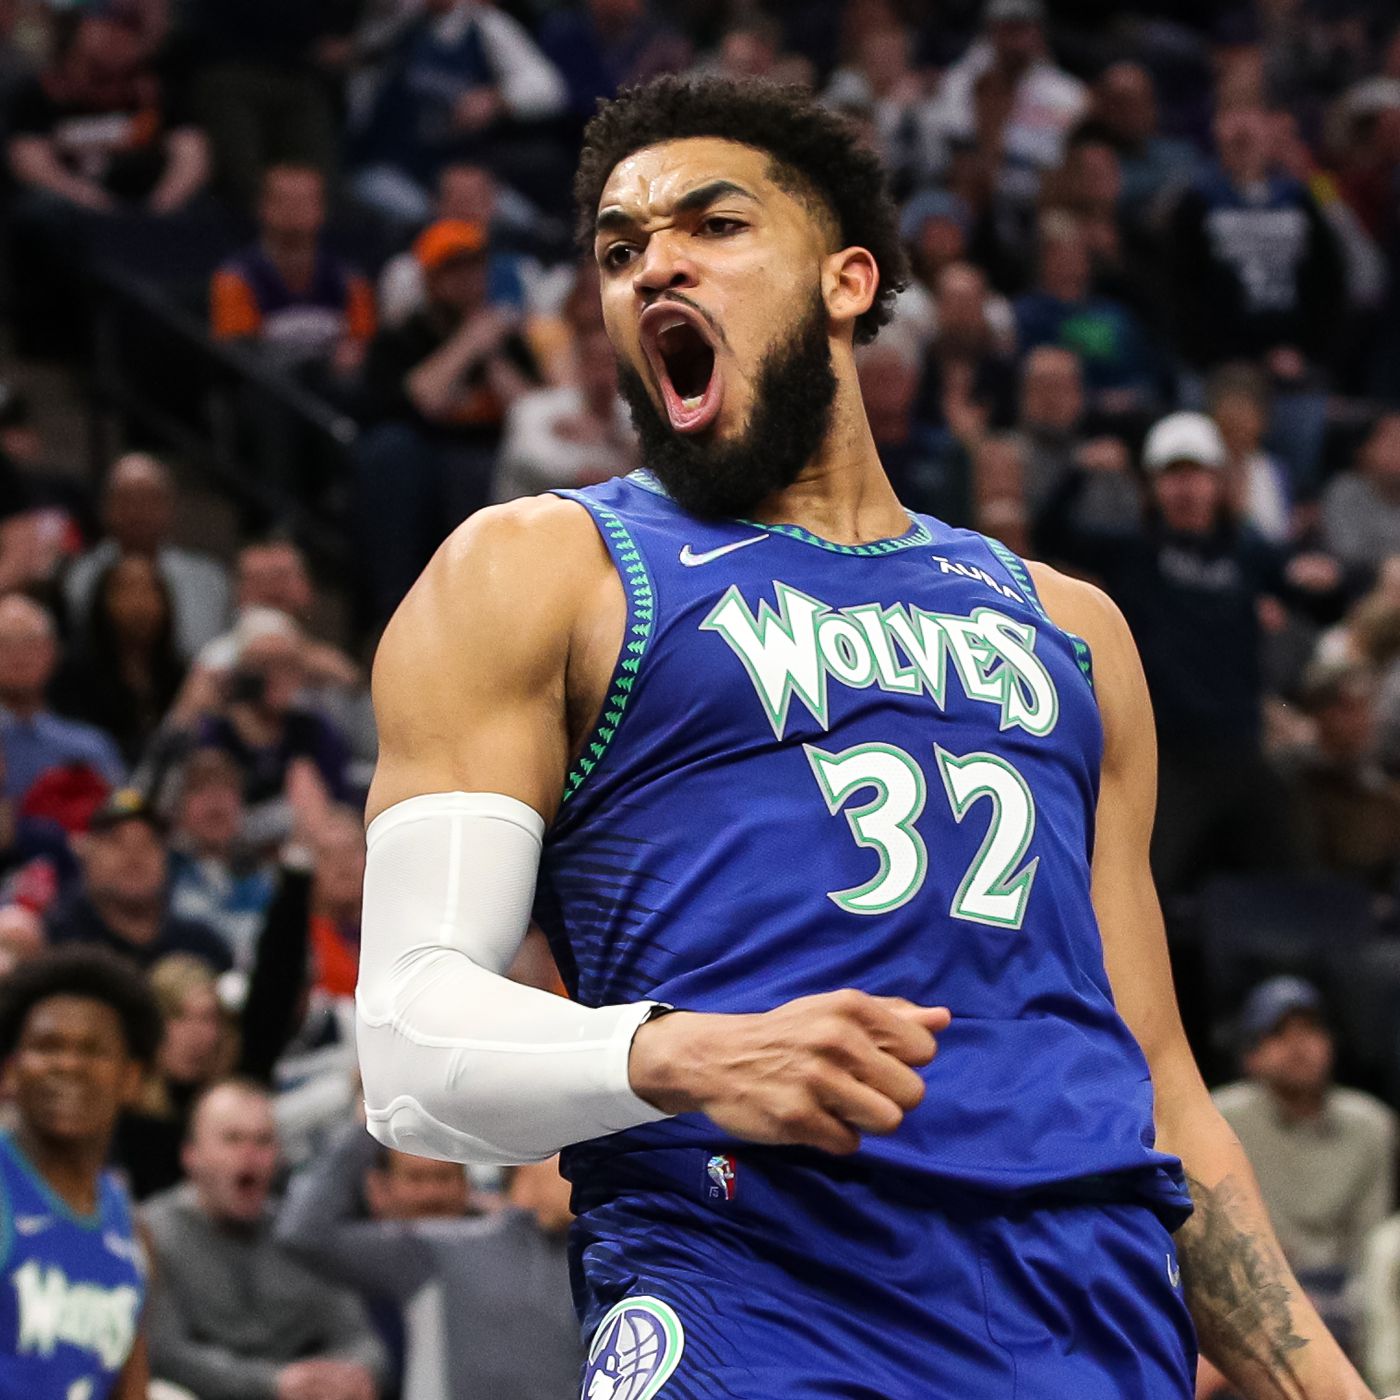 Karl Anthony Towns, Timberwolves' Karl Anthony Towns Trade To The Pelicans In Bold Proposal